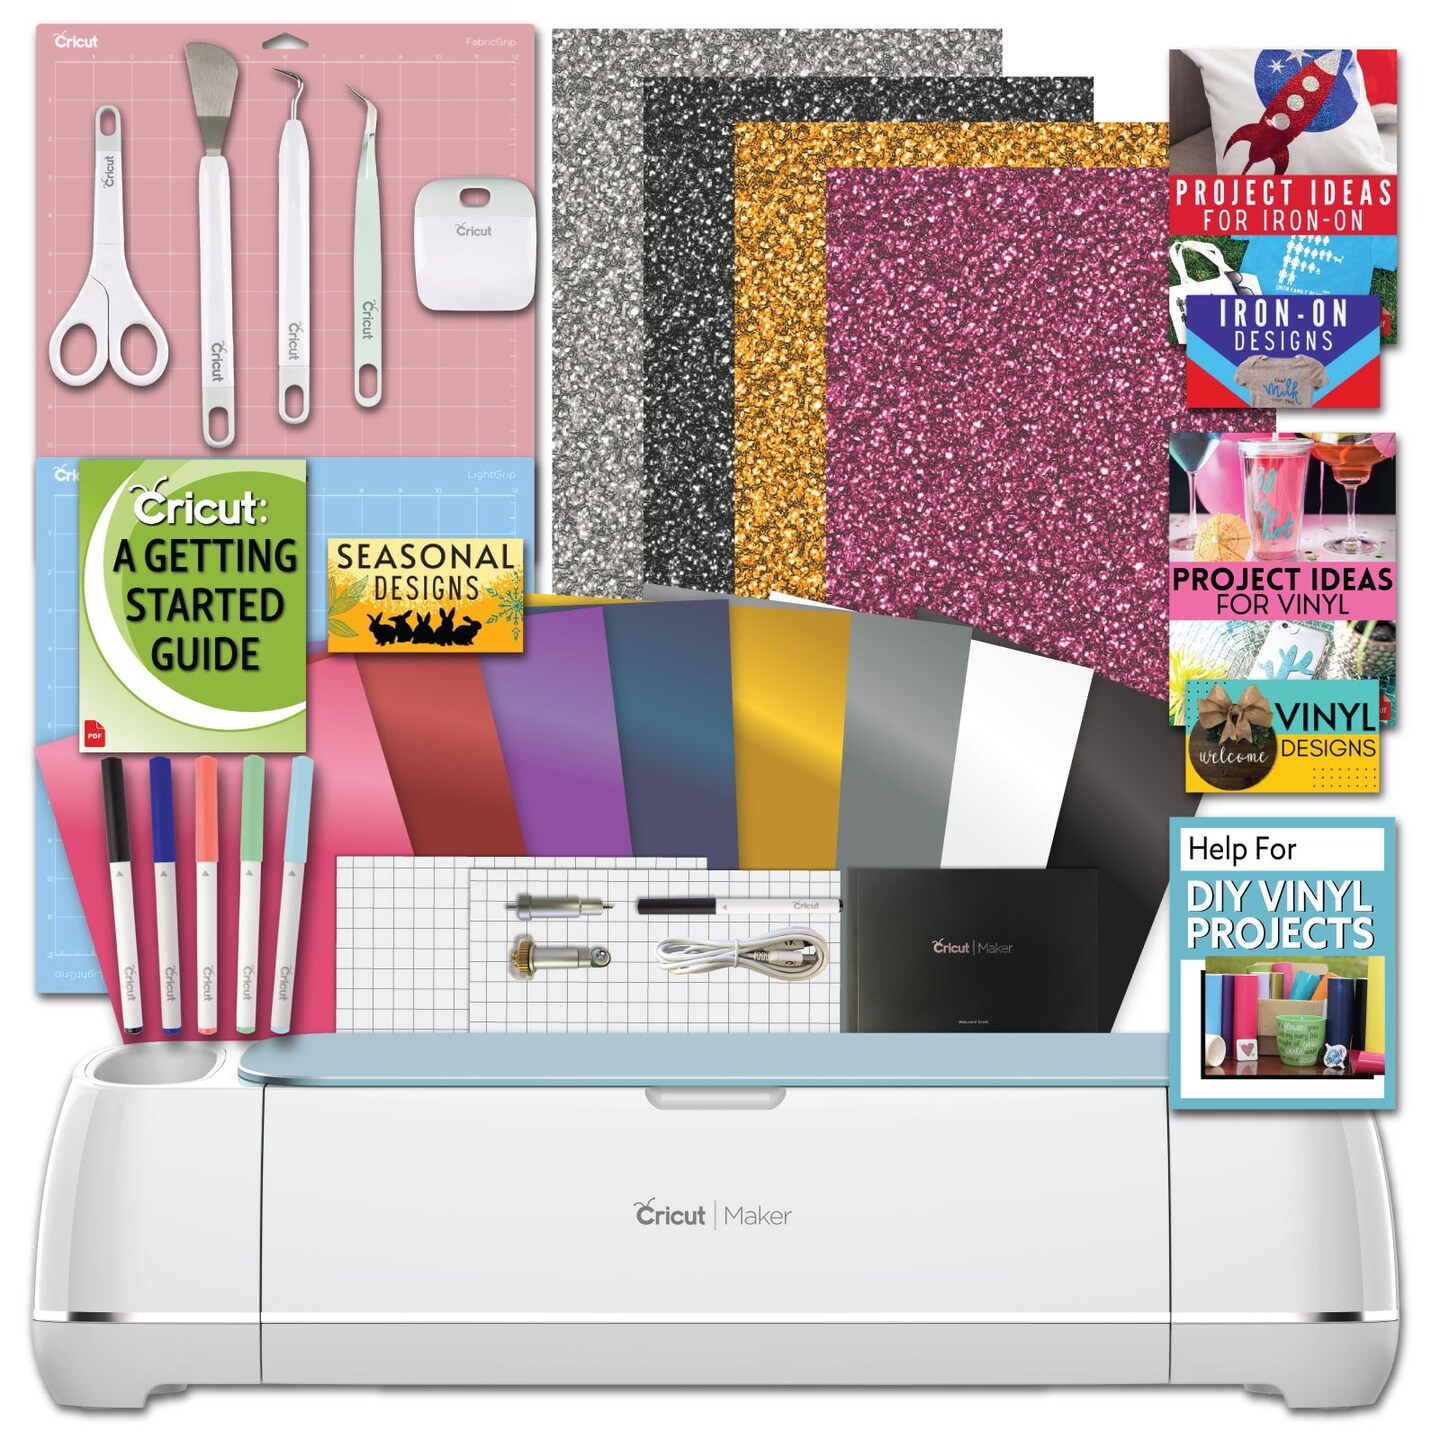 Cricut Maker Blue Machine Bundle with Iron-on, Vinyl, Tools, and